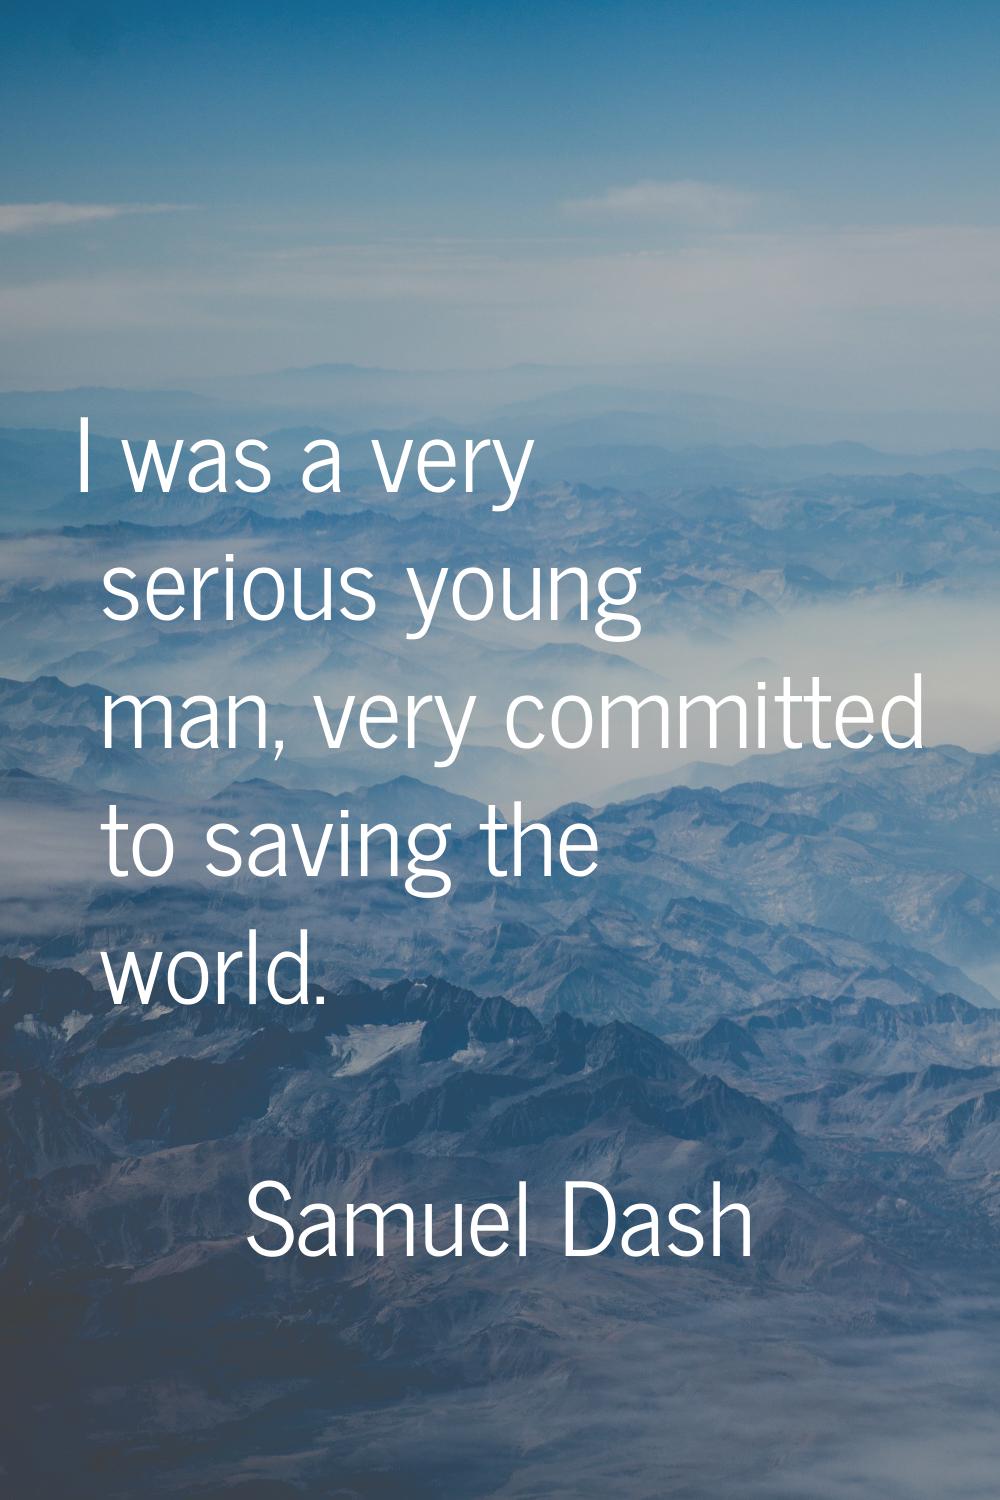 I was a very serious young man, very committed to saving the world.